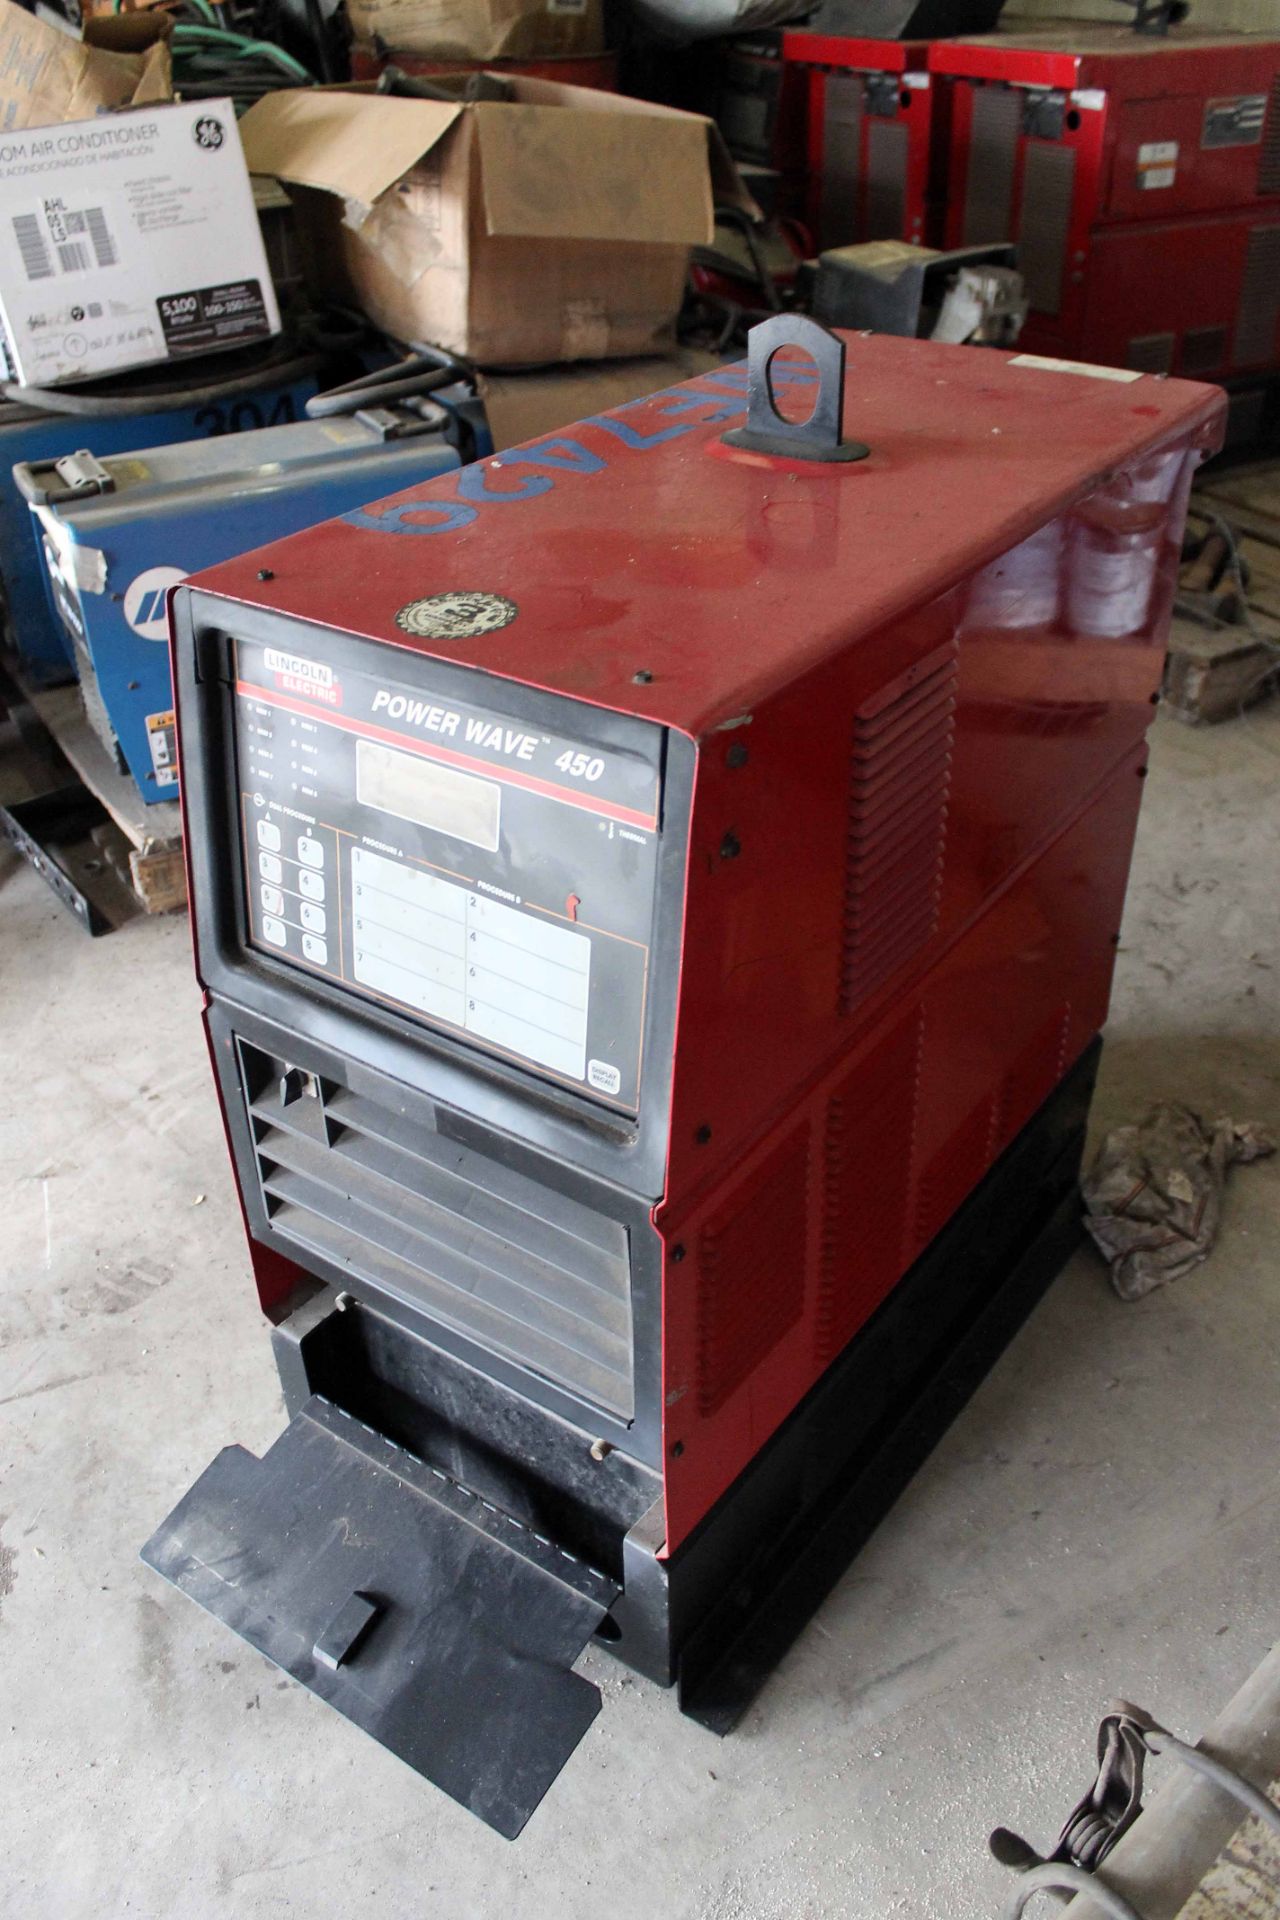 WELDING POWER SOURCE, LINCOLN POWERWAVE MDL. 450, 450 amp cap., S/N U1970910120 (Location E- - Image 2 of 4